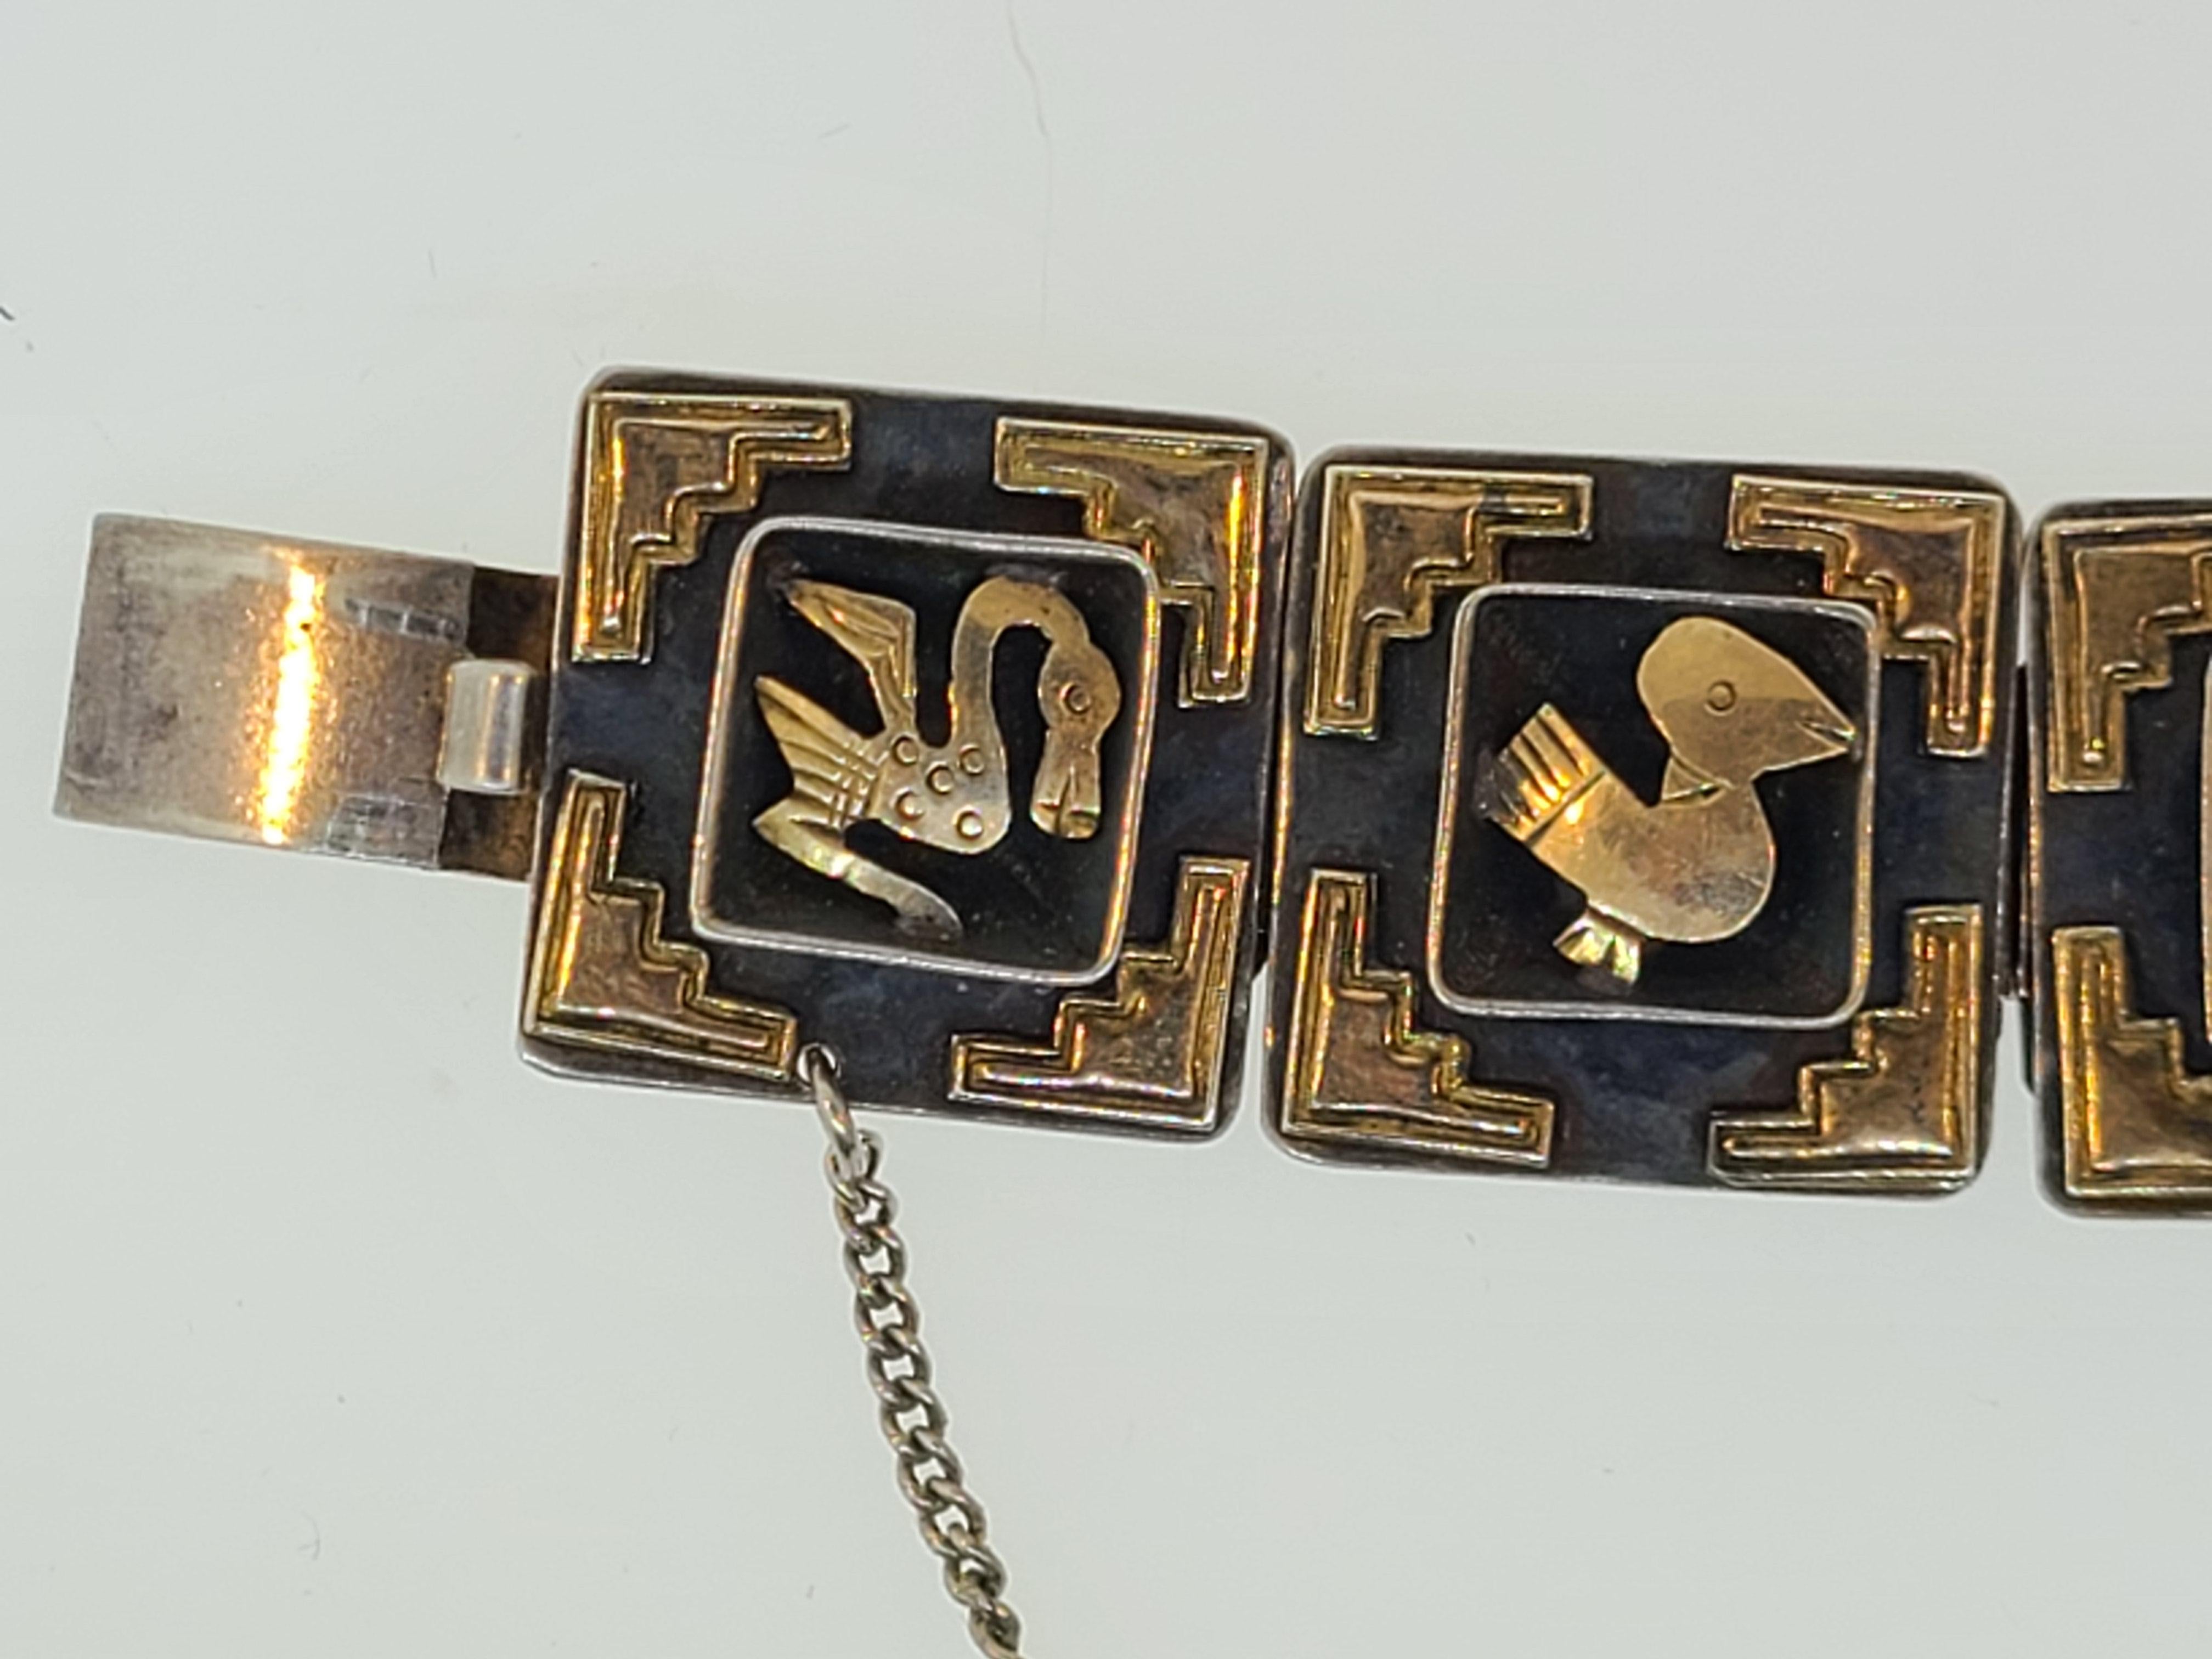 This estate found 1940's panel bracelet is made of sterling silver and embellished with 18K yellow gold Inca designs. Signed Cuzco this Peruvian made bracelet is a wonderful example of their handcrafted jewelry. The Bracelet is 7 inches long from